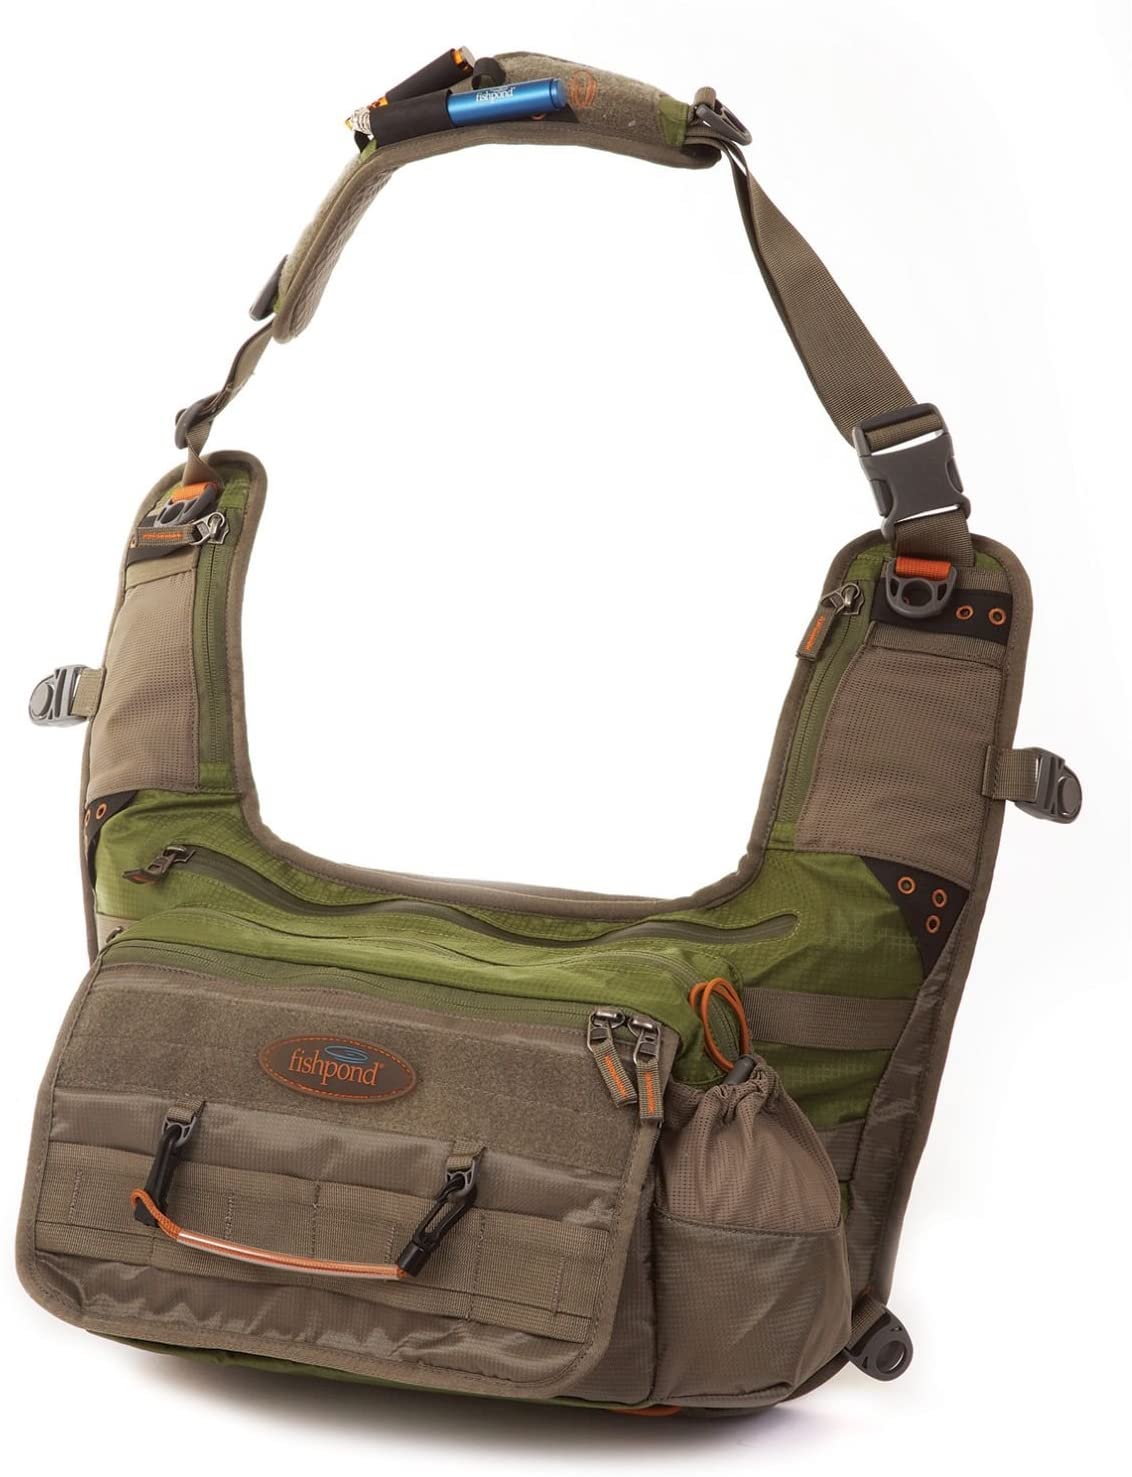 Fishpond Delta Fly Fishing Sling Pack - sporting goods - by owner